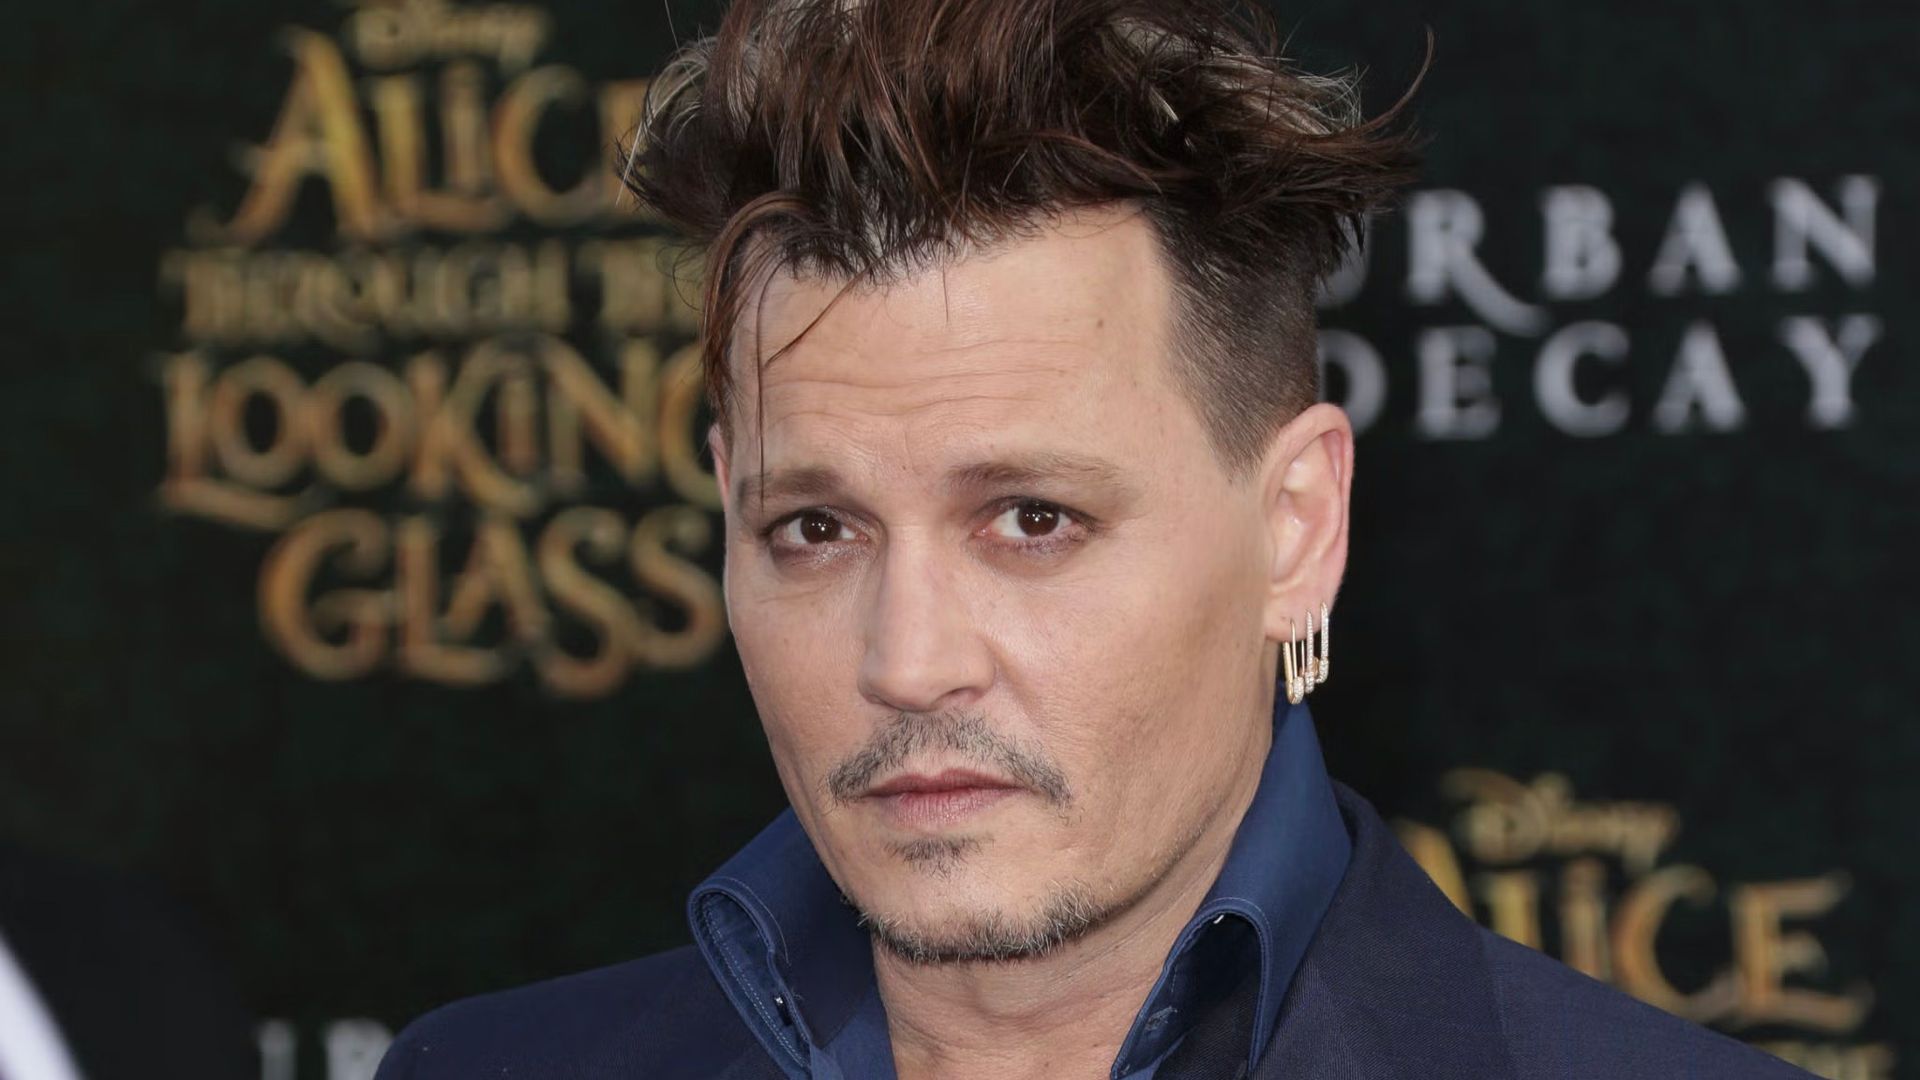 Johnny Depp, one of the most unordinary actors